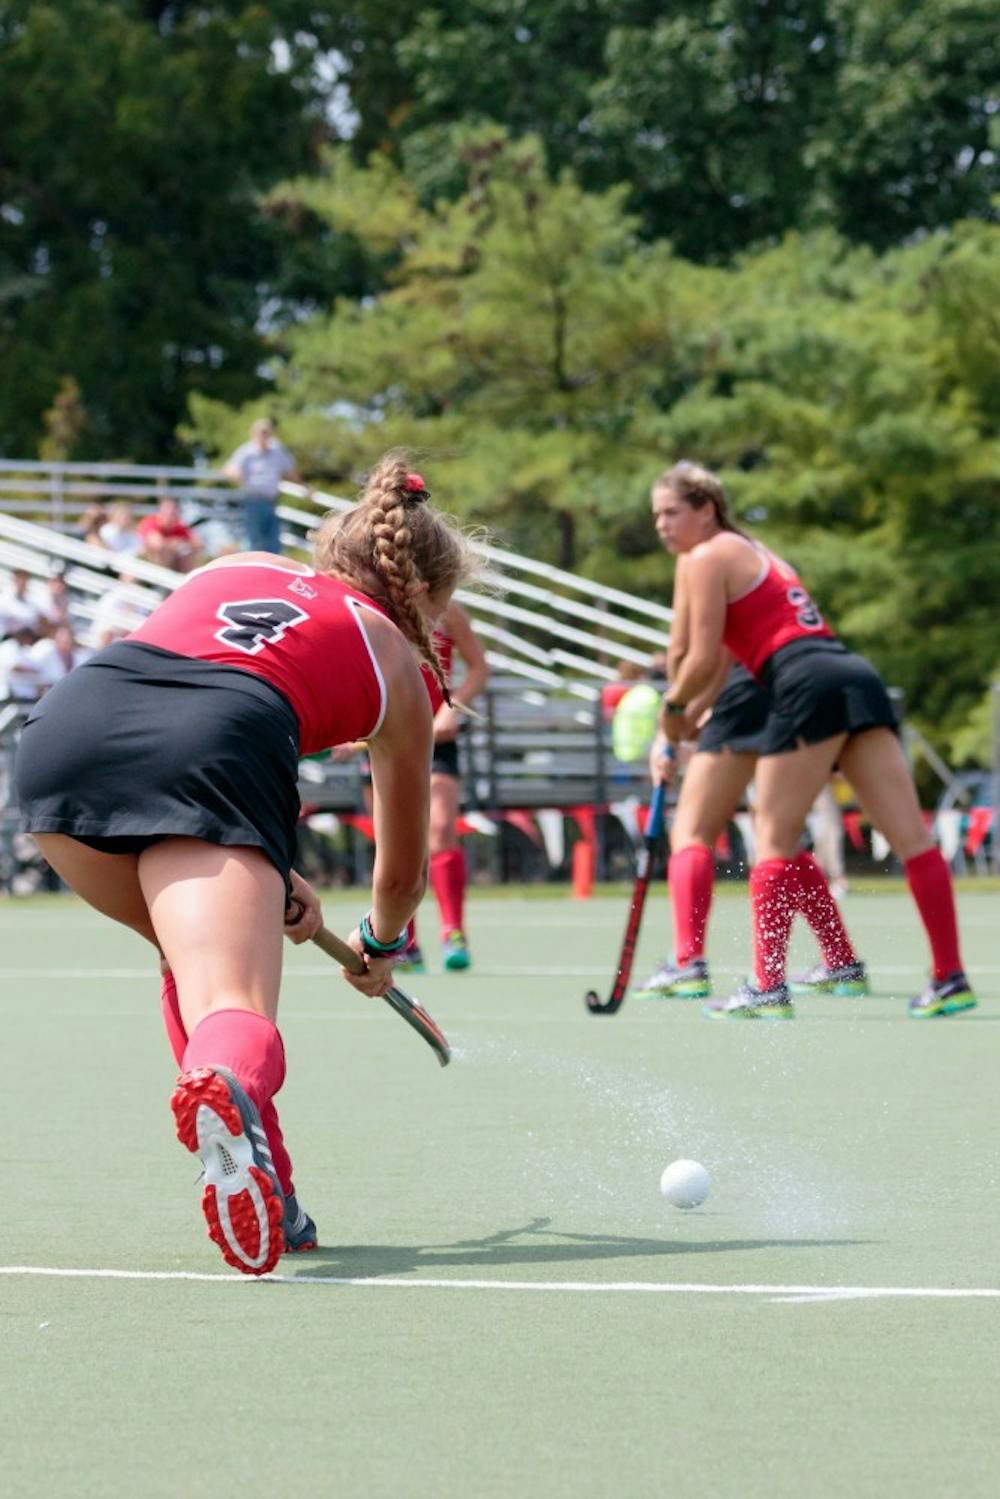 Forward Michelle Shampton launches the ball for a penalty shot during the game against St. Louis Aug. 25, 2017, at the Briner Sports Complex. The Cardinals won 5-0. Kyle Crawford // DN